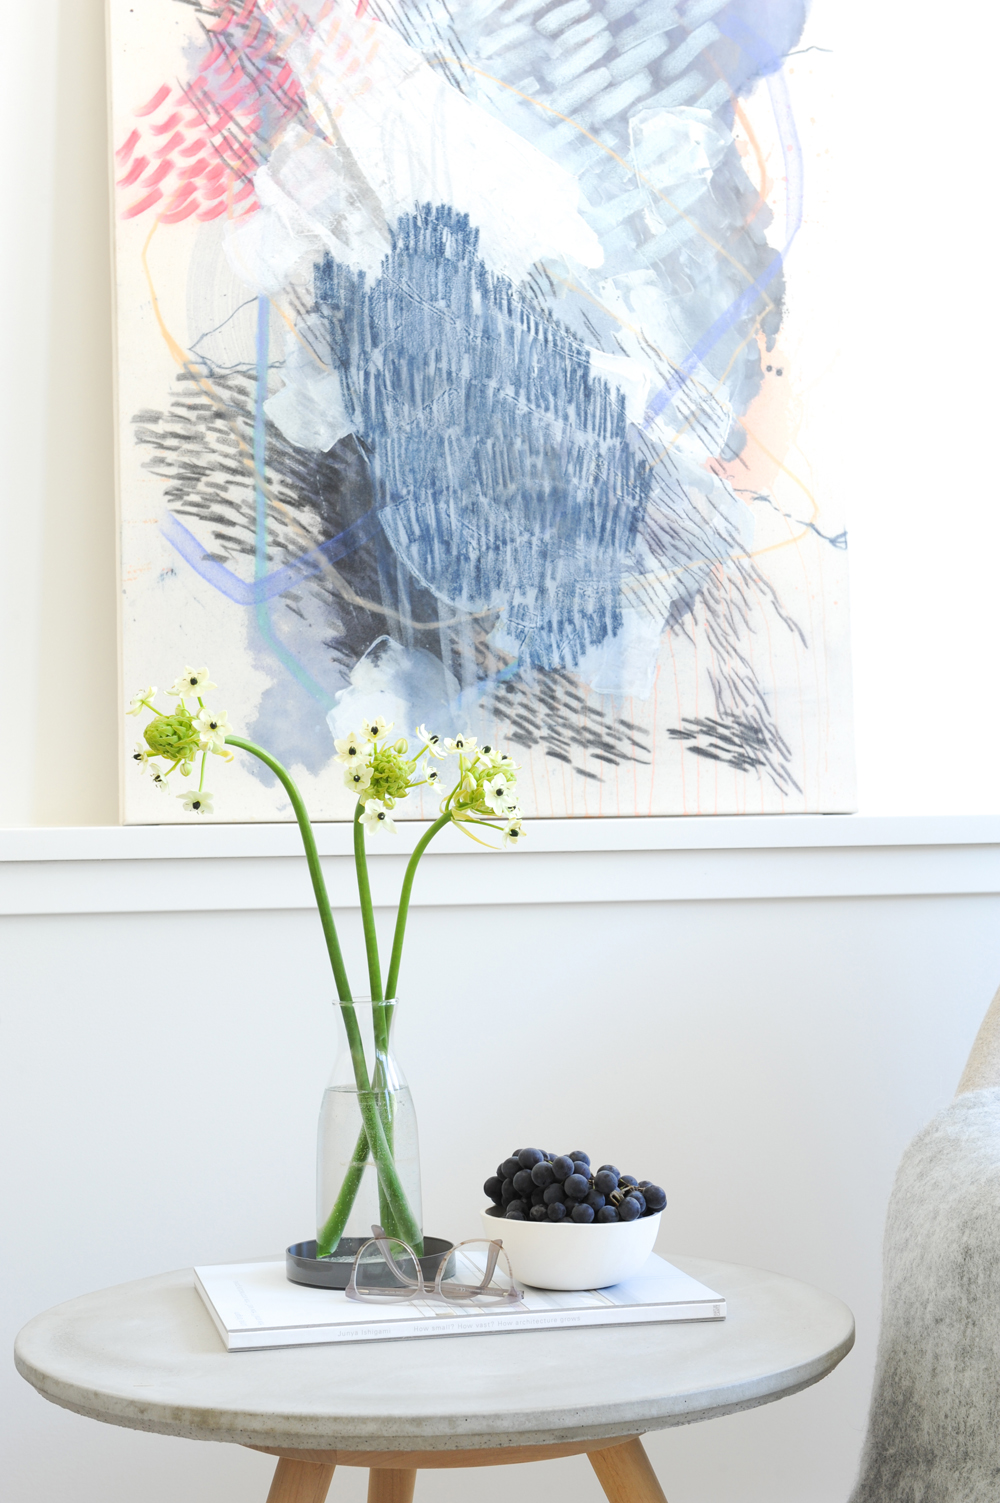 abstract painting, three blooms, bowl of grapes